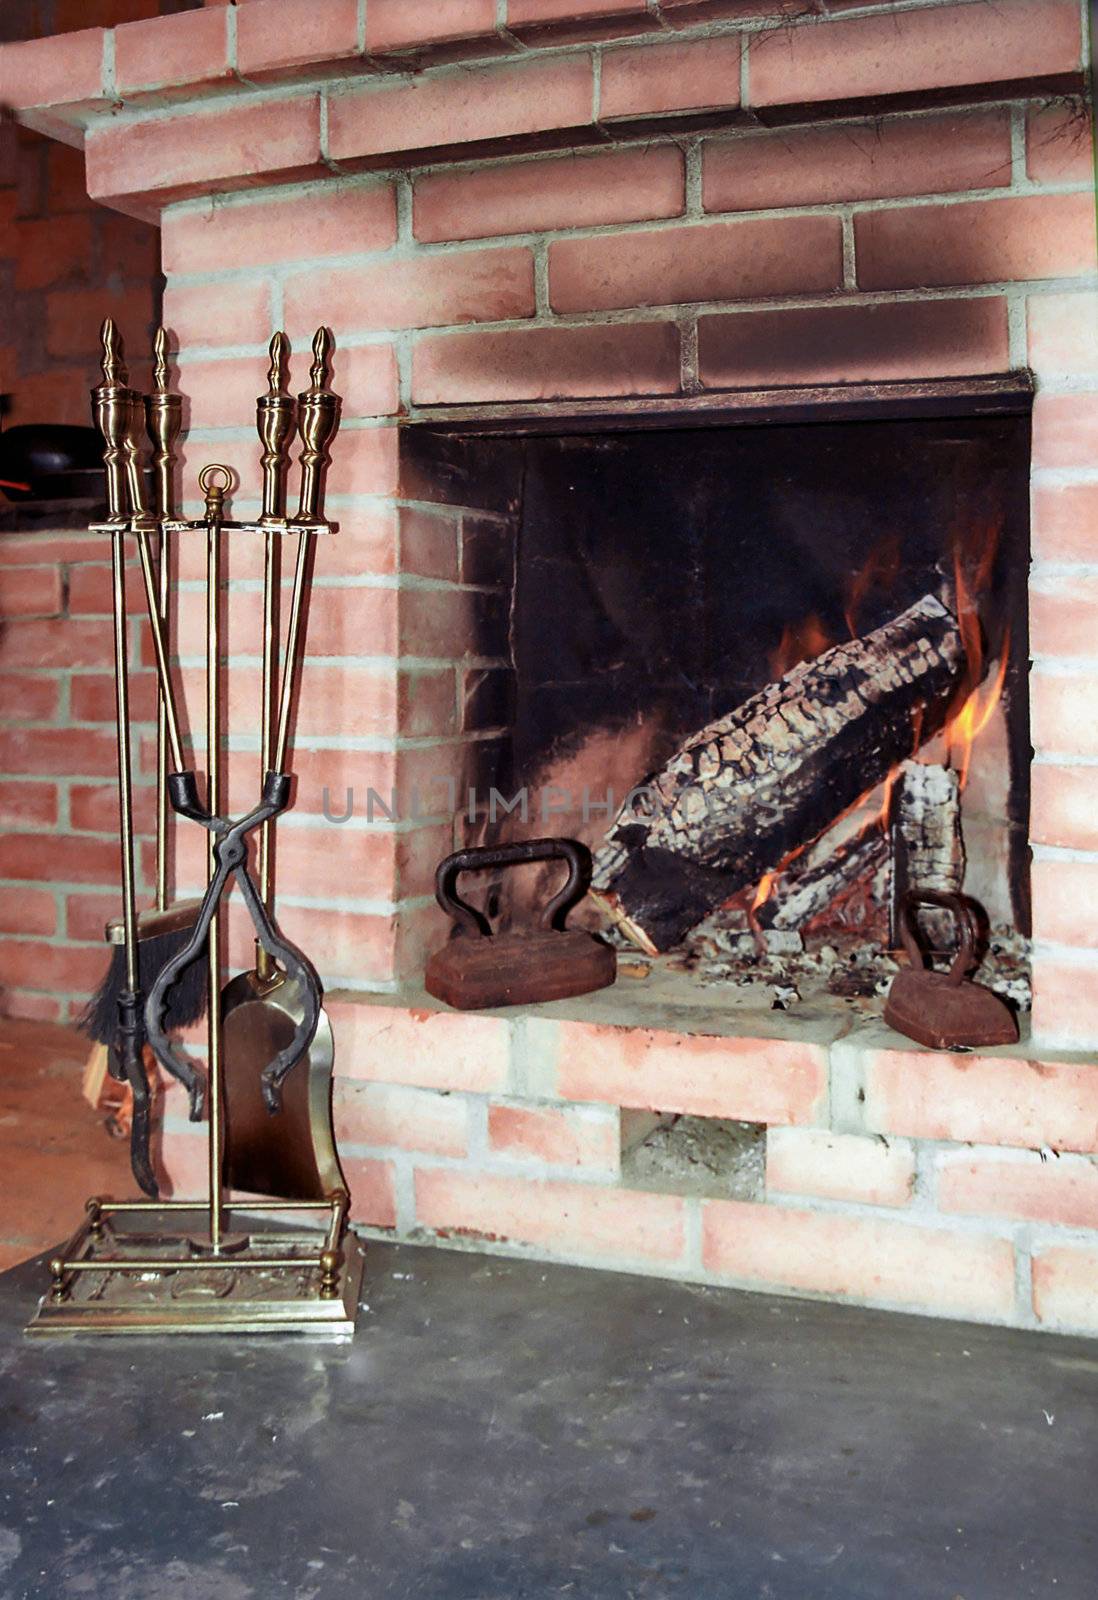 Fireplace with two old irons in it by mulden